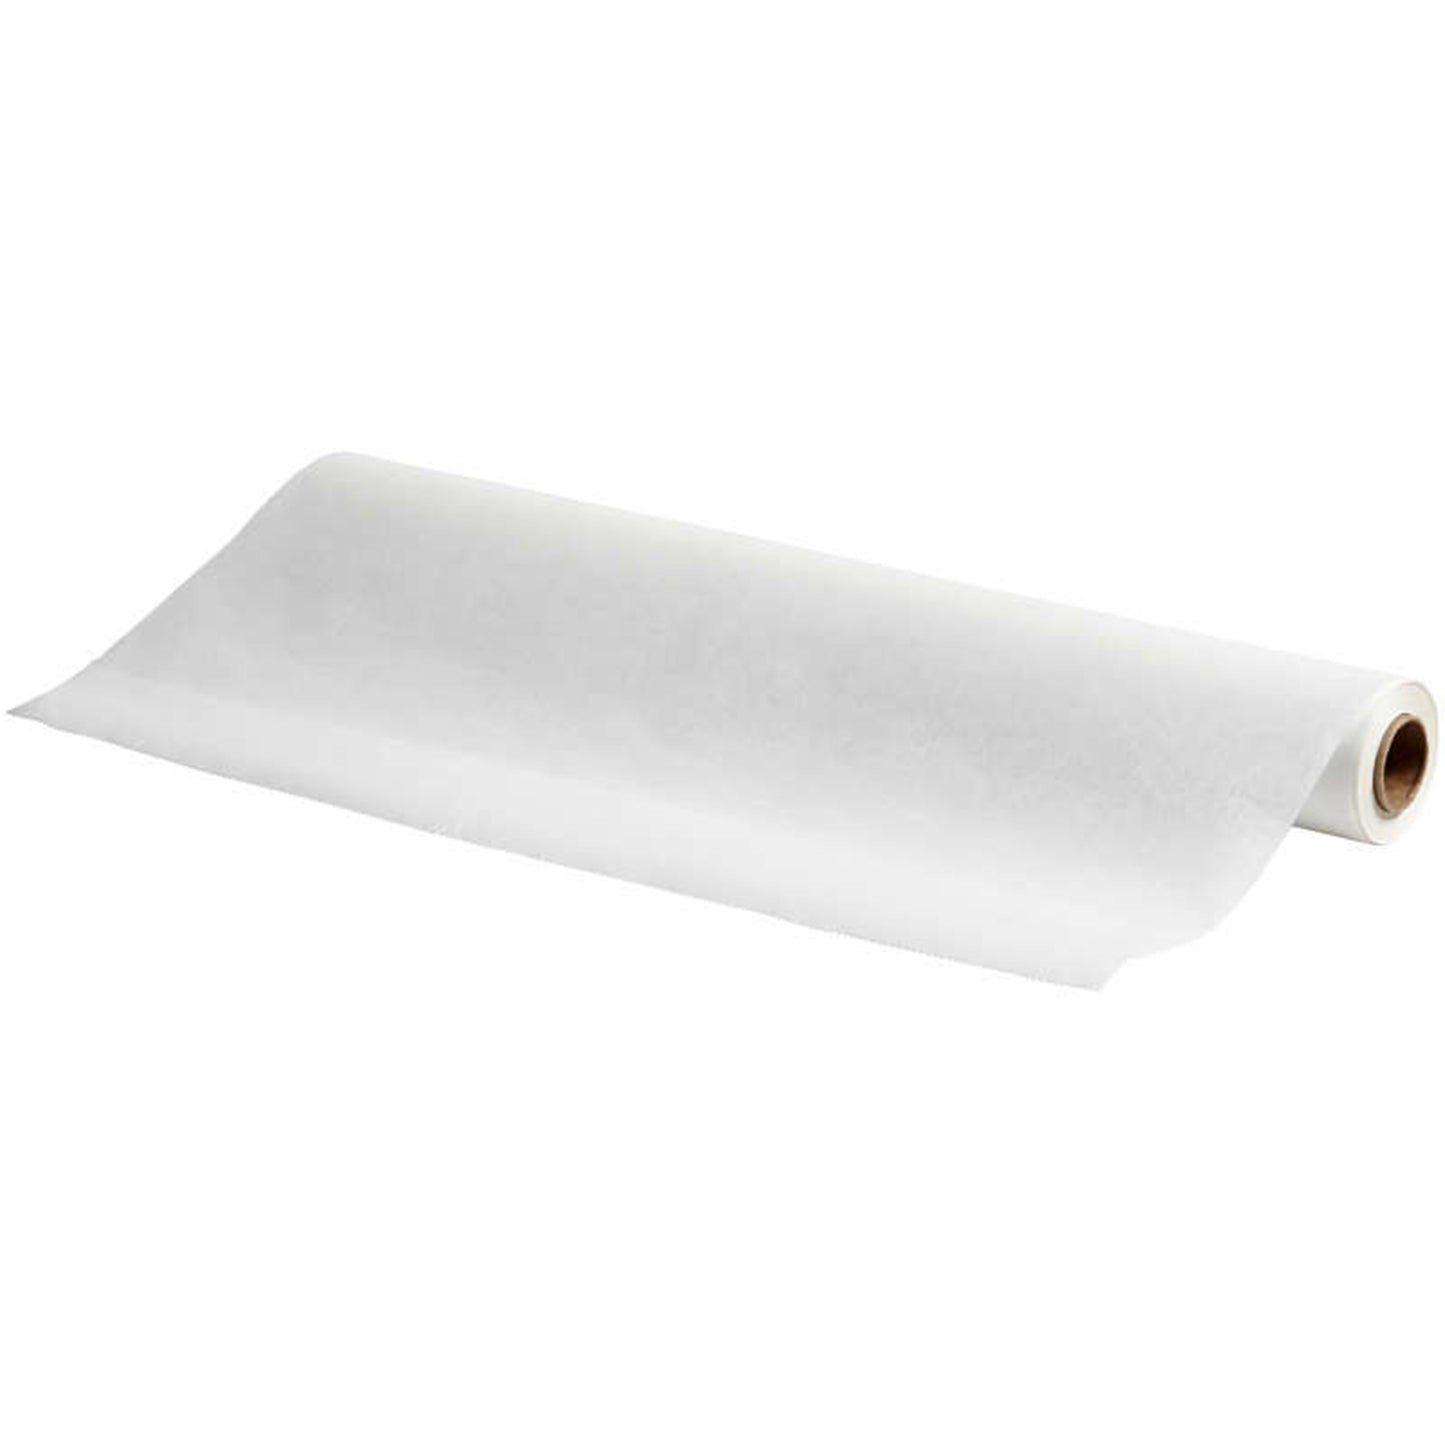 Nicole Home Collection Plastic Wrap Clear 100 Sq Feet